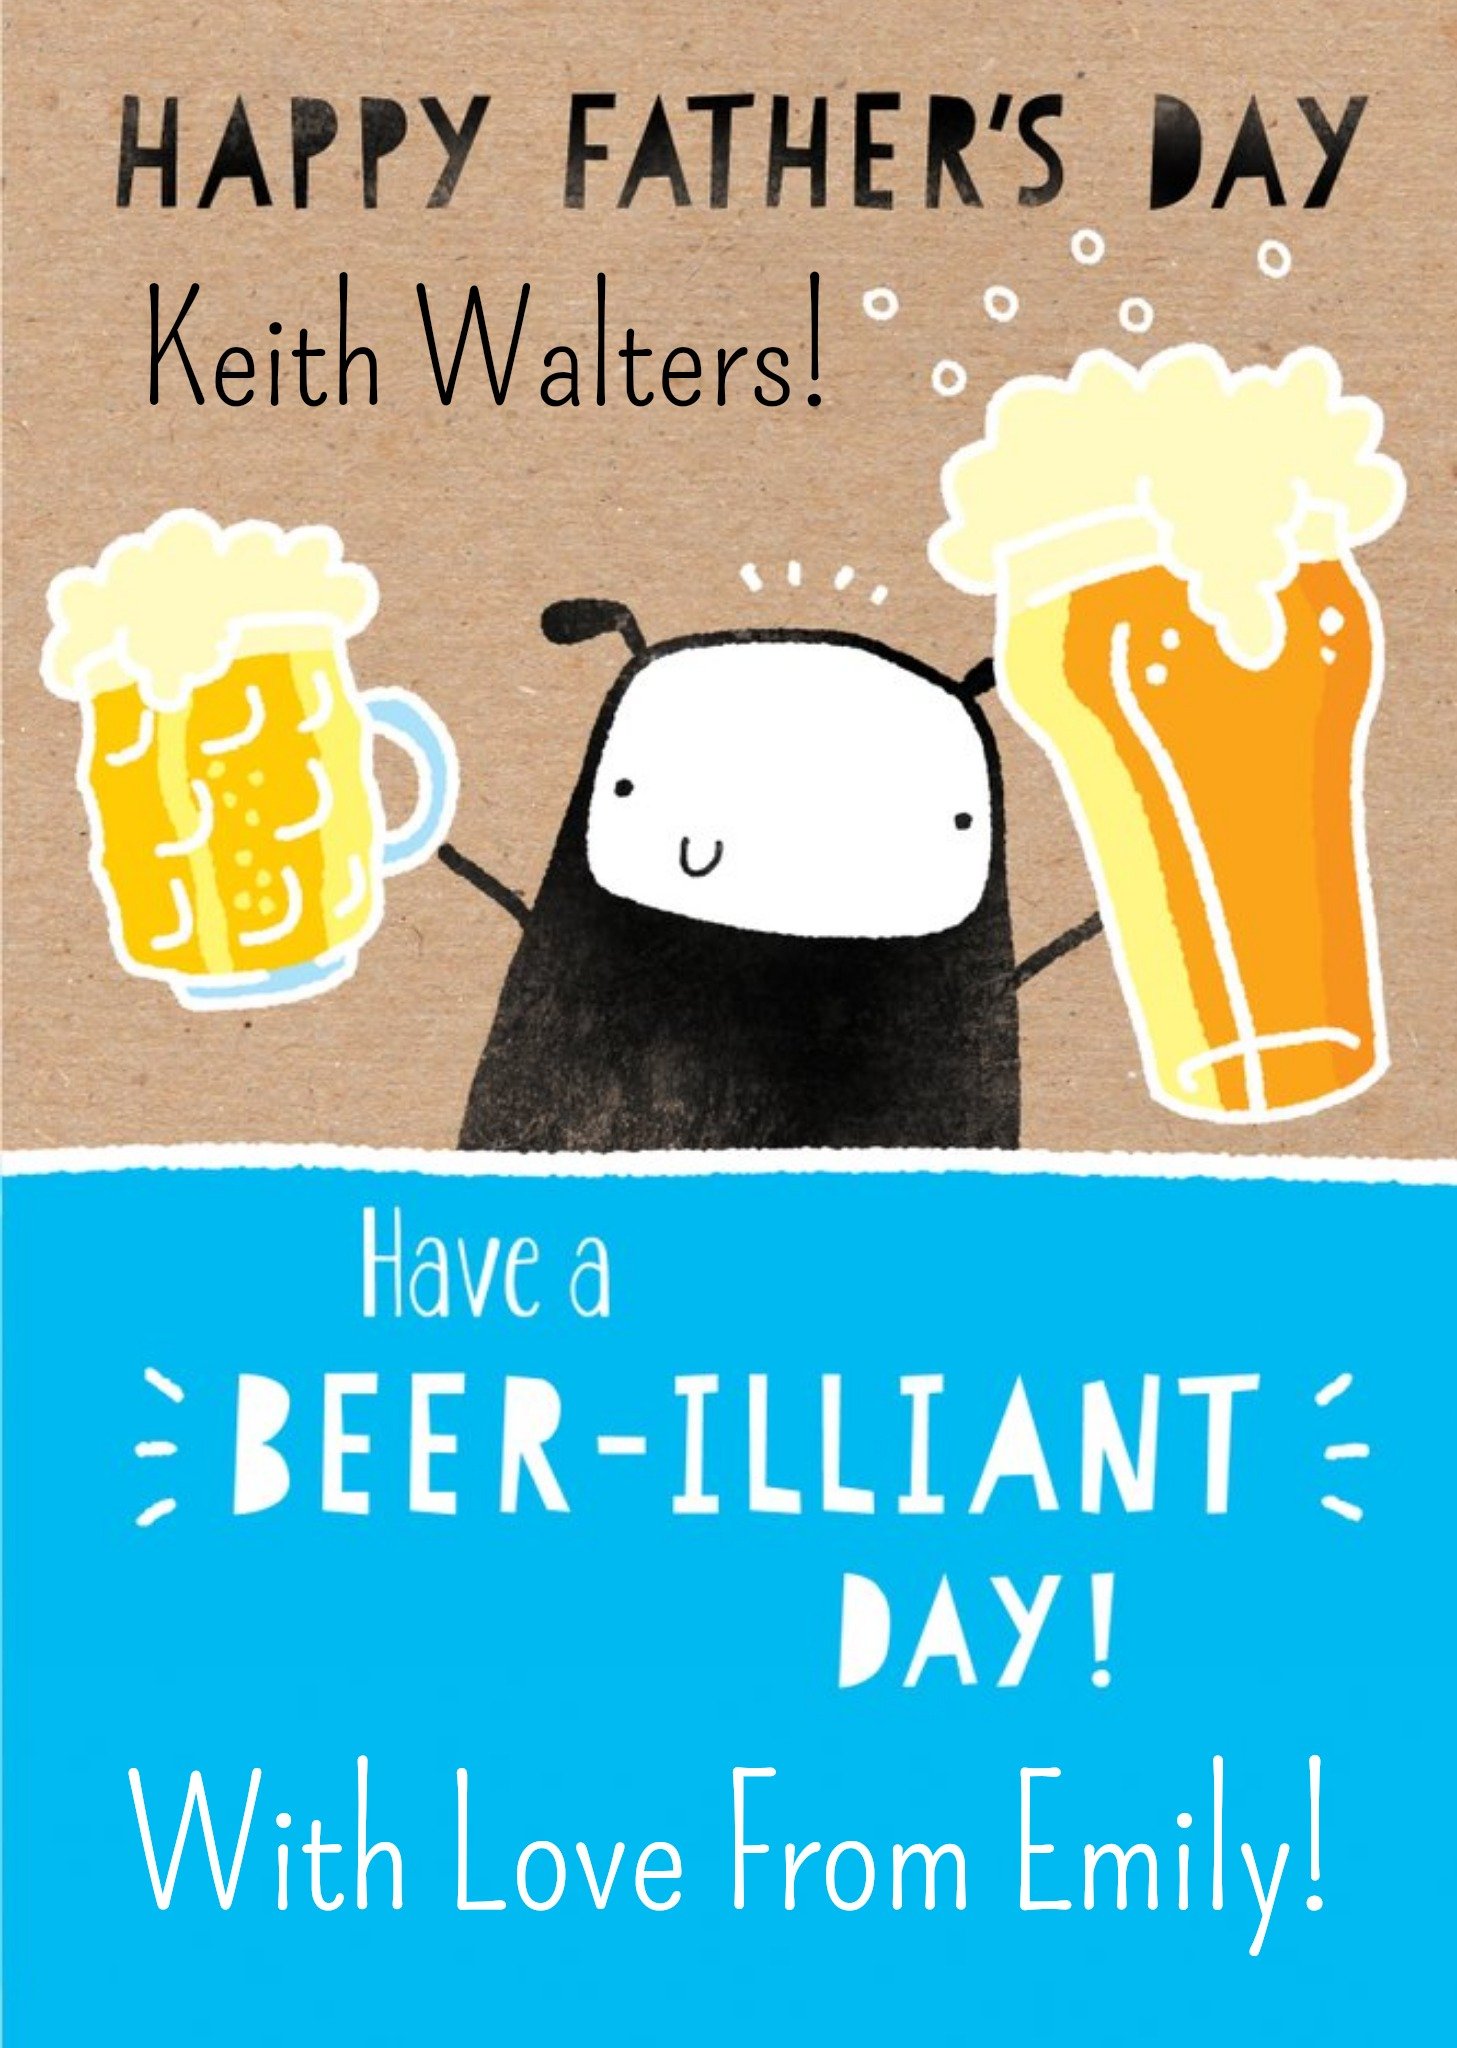 Moonpig Cute Illustration Of A Sheep Holding Beers Beer Illiant Day Personalised Fathers Day Card, L